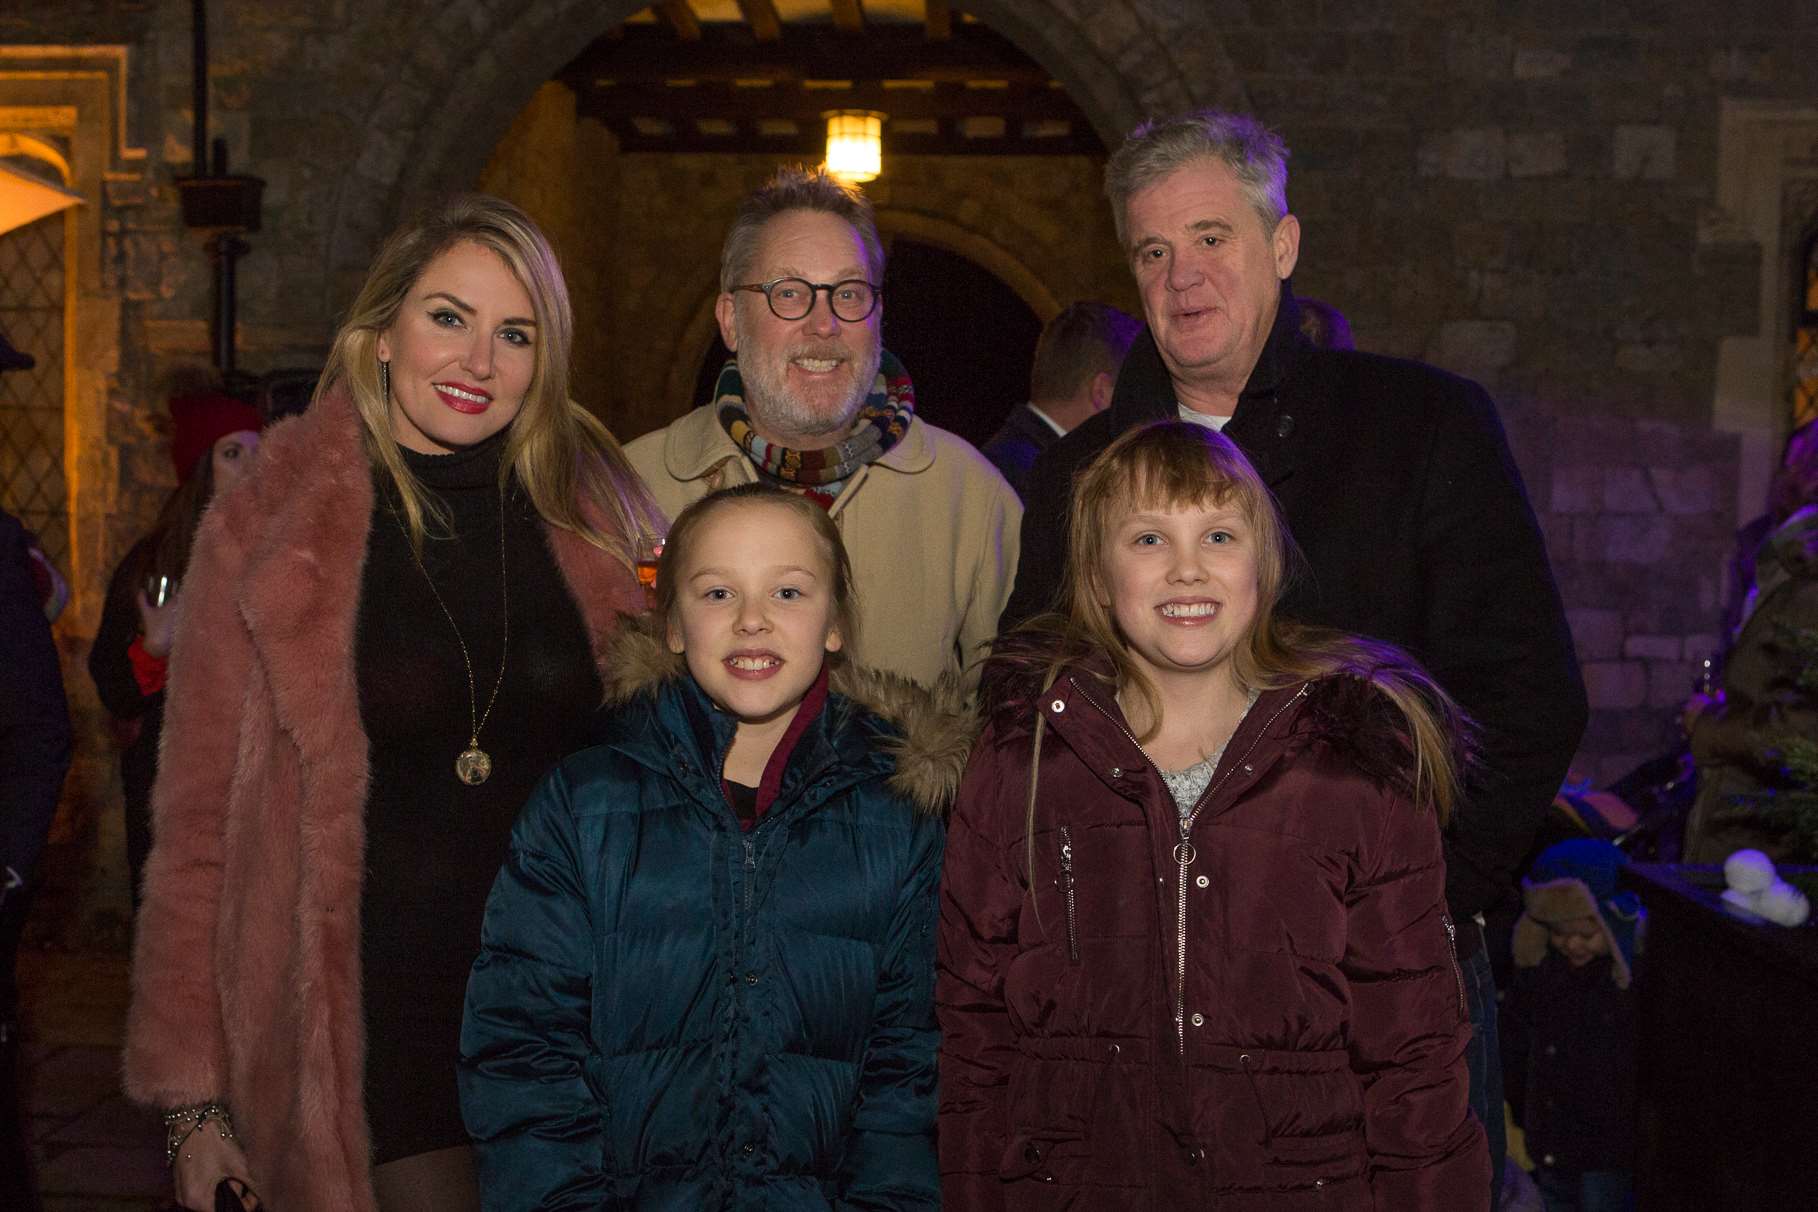 Vic Reeves, wife Nancy Sorrell and family attend the official opening of the new ice rink at Eastwell Manor – A Champneys Spa Hotel.